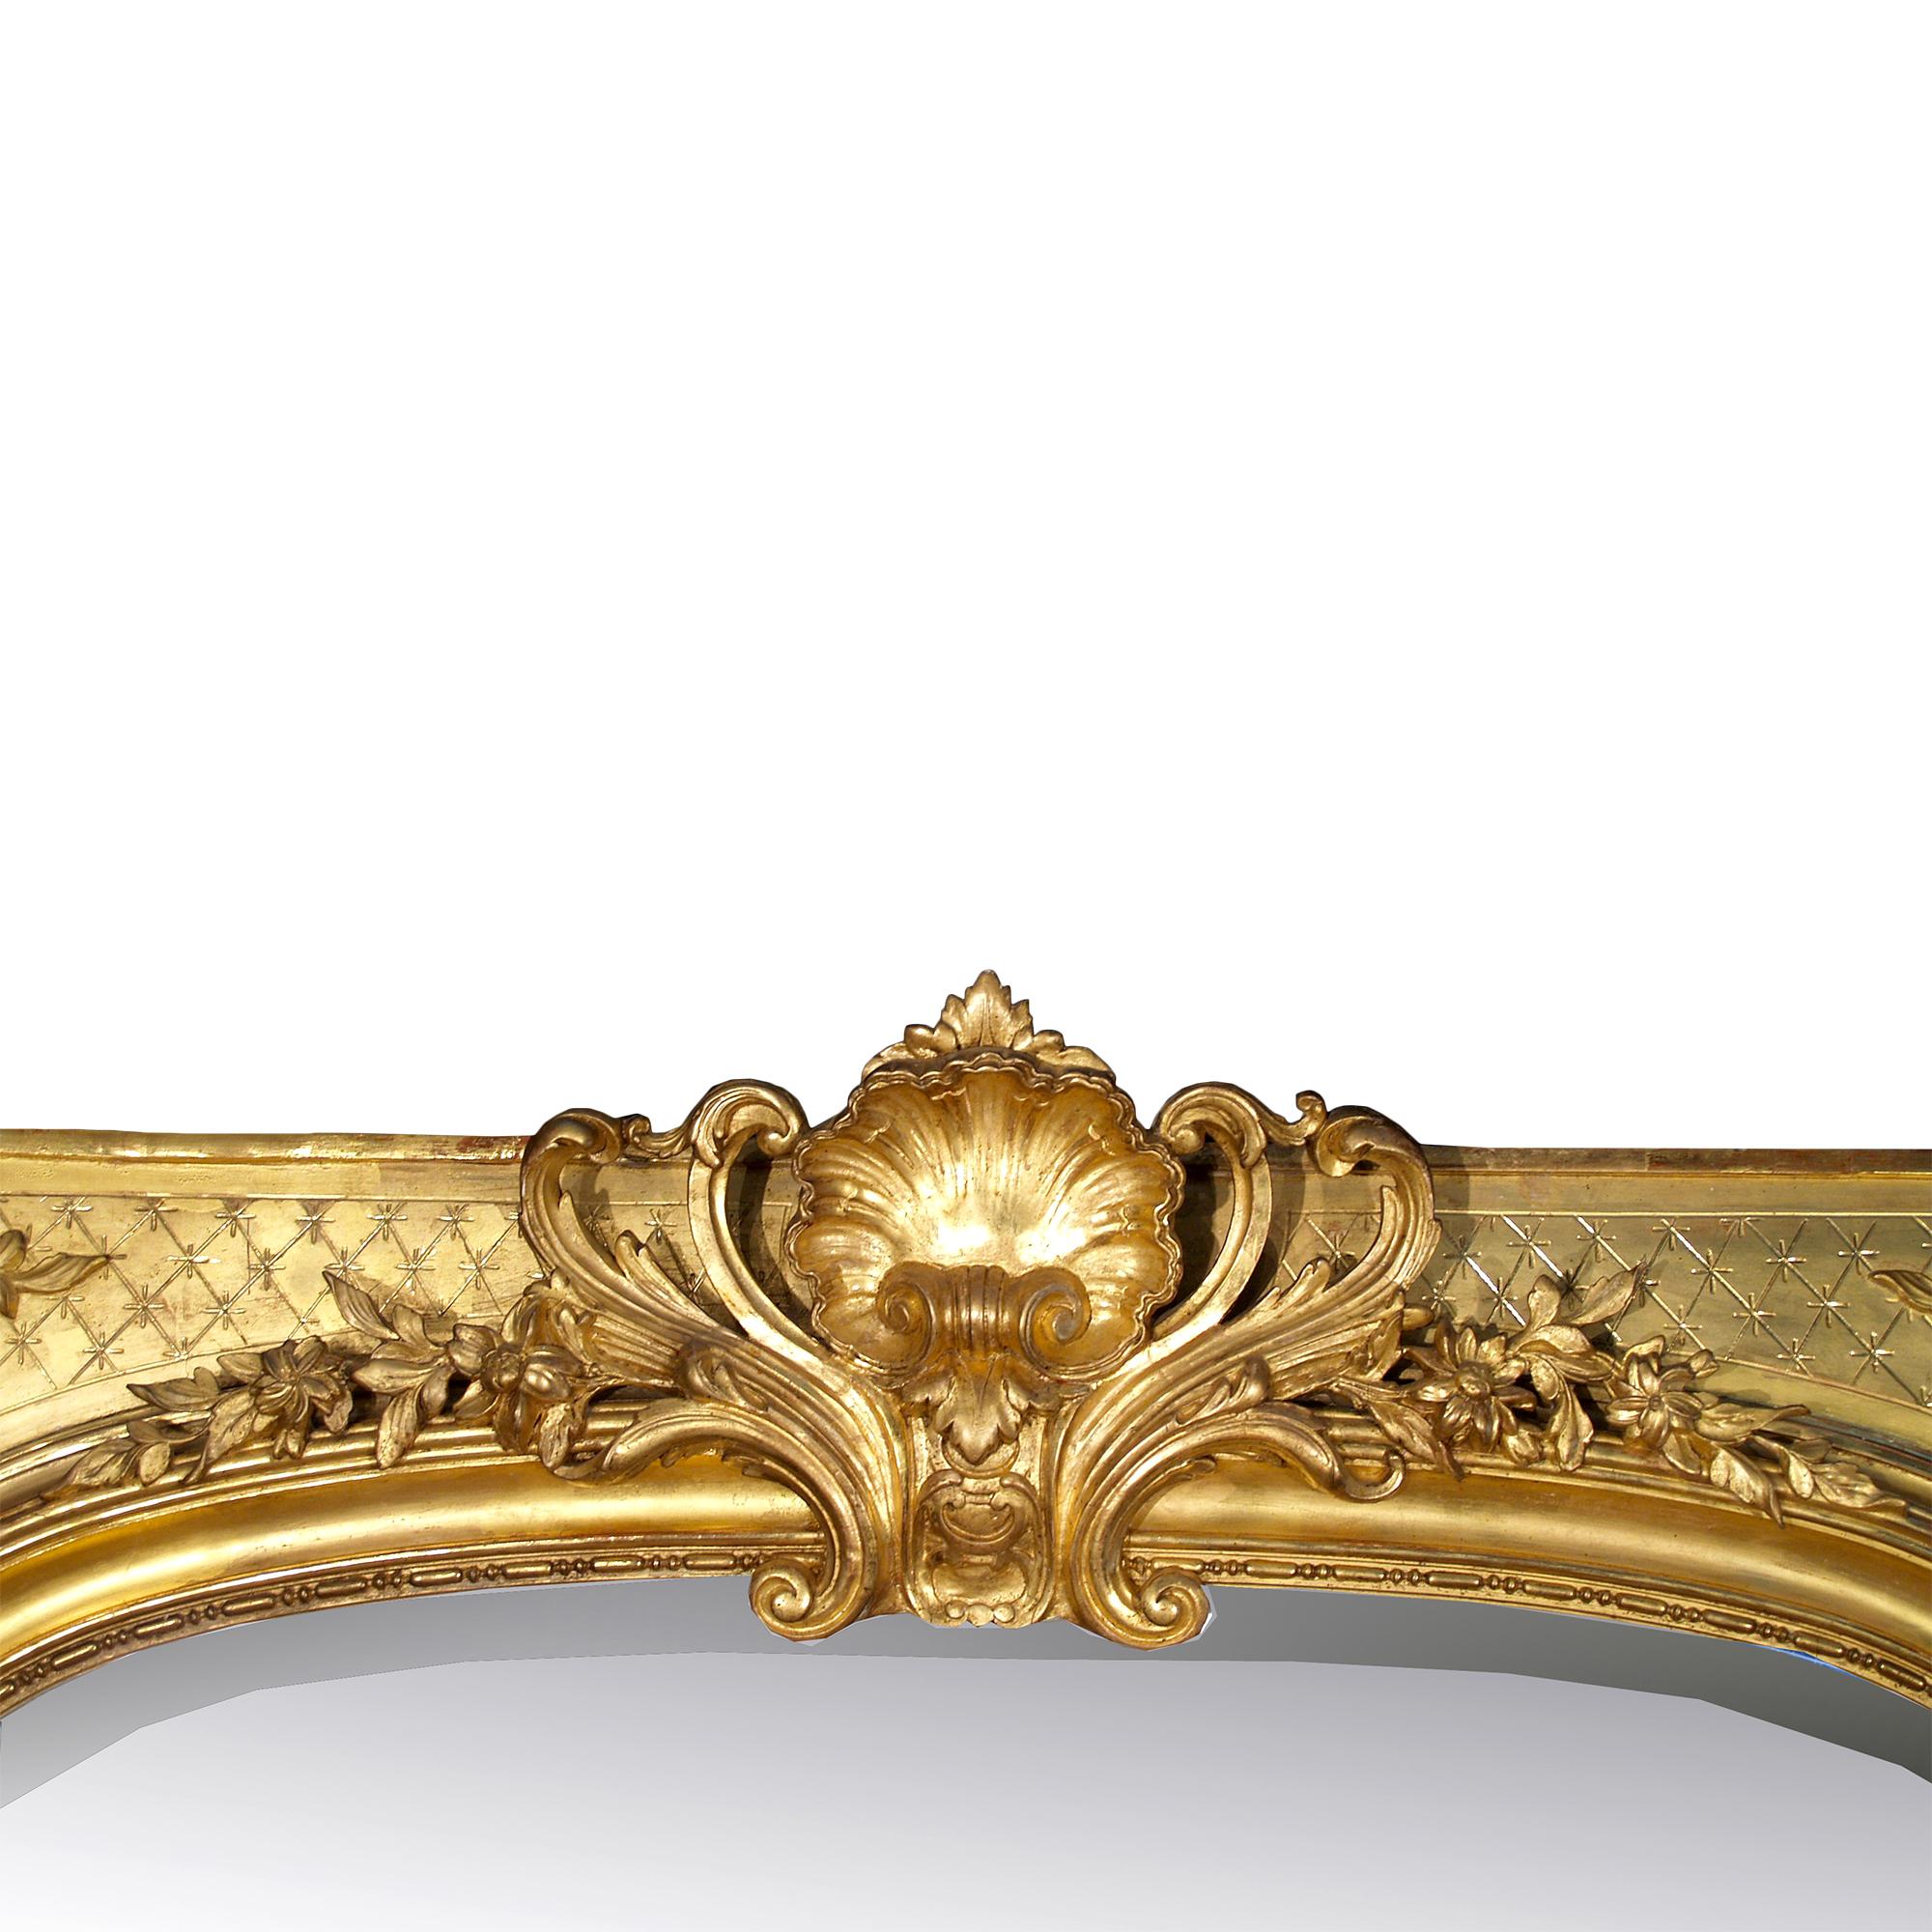 A very attractive 19th century Louis xvi st. giltwood mirror with its original beveled mirror plate. The sides have a moulded border decorated by intertwined carved rose garlands. At the top is an impressive richly carved central shell in a